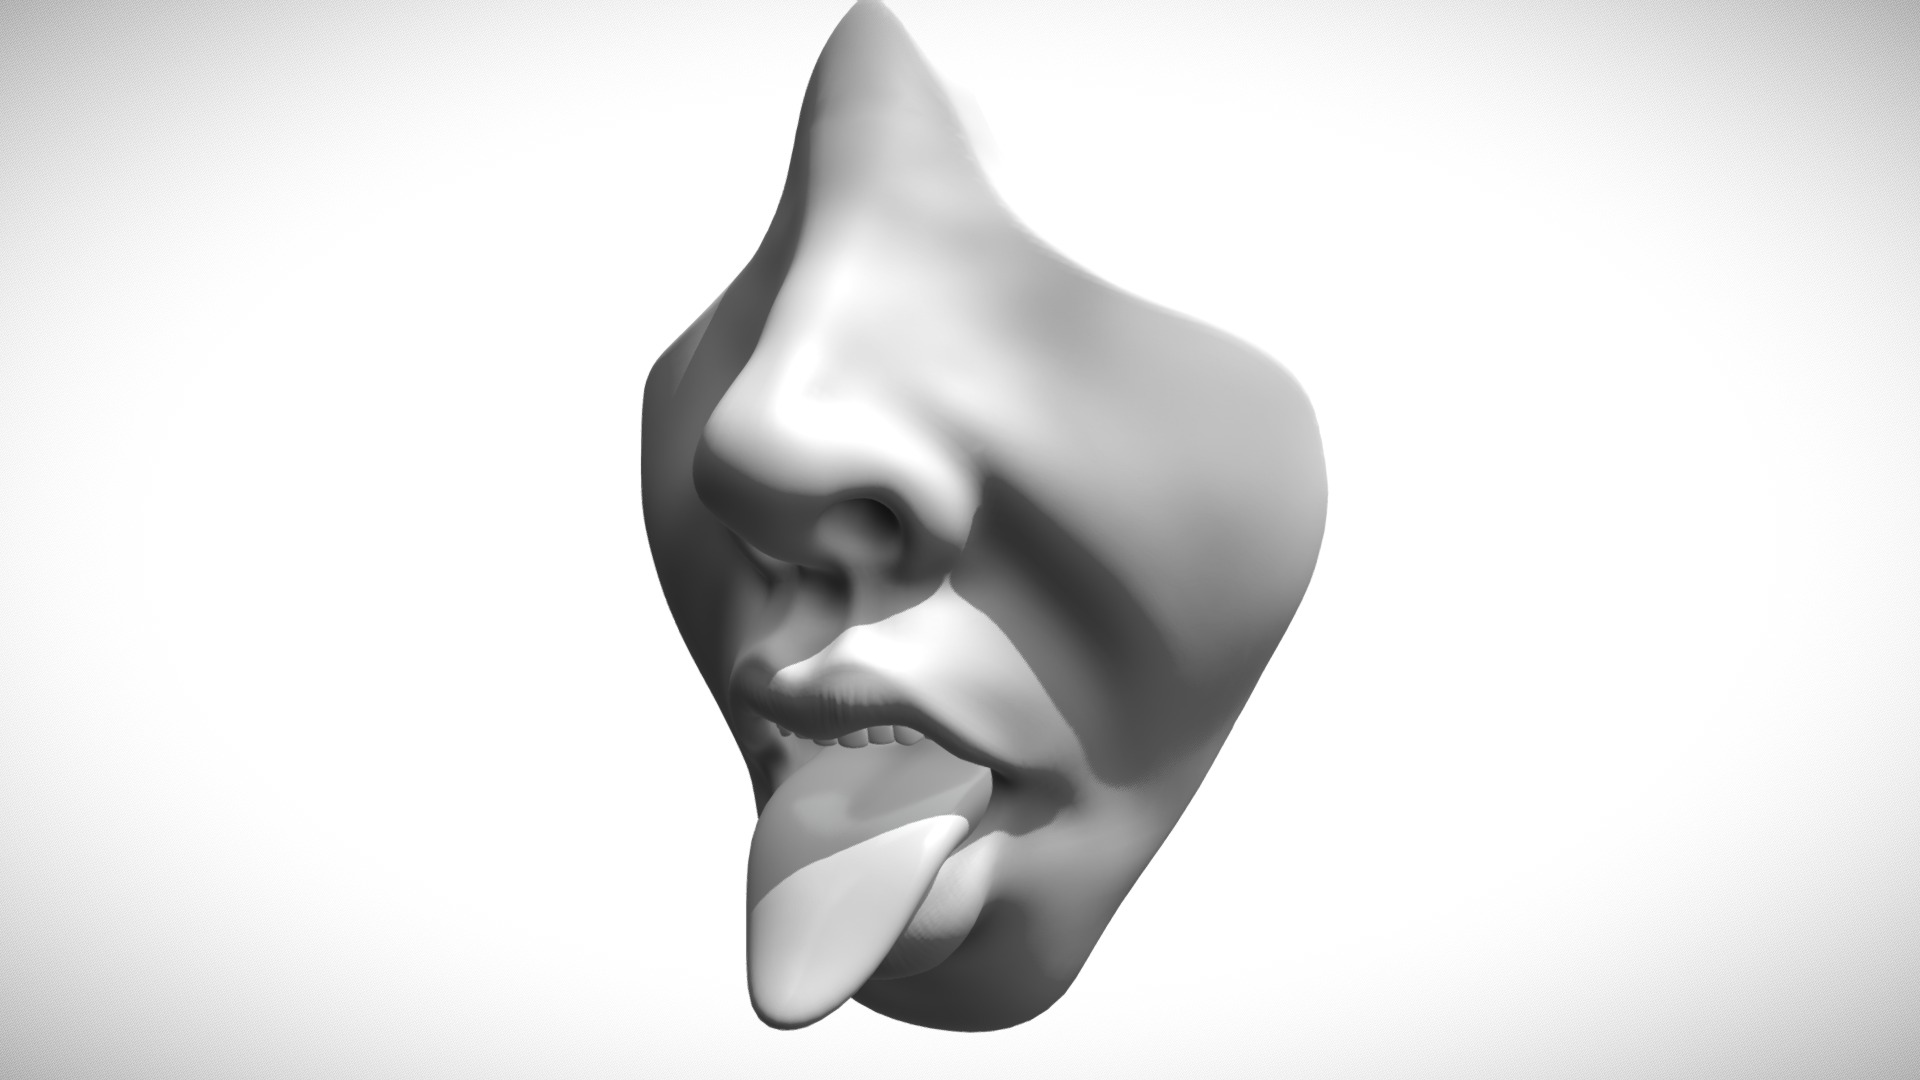 Frist Day of Sculpt January 2018 Challenge! 

http://weeklycgchallenge.com/sculptjanuary-2018/ - 1 Mouth and Nose - 3D model by nuffin 3d model